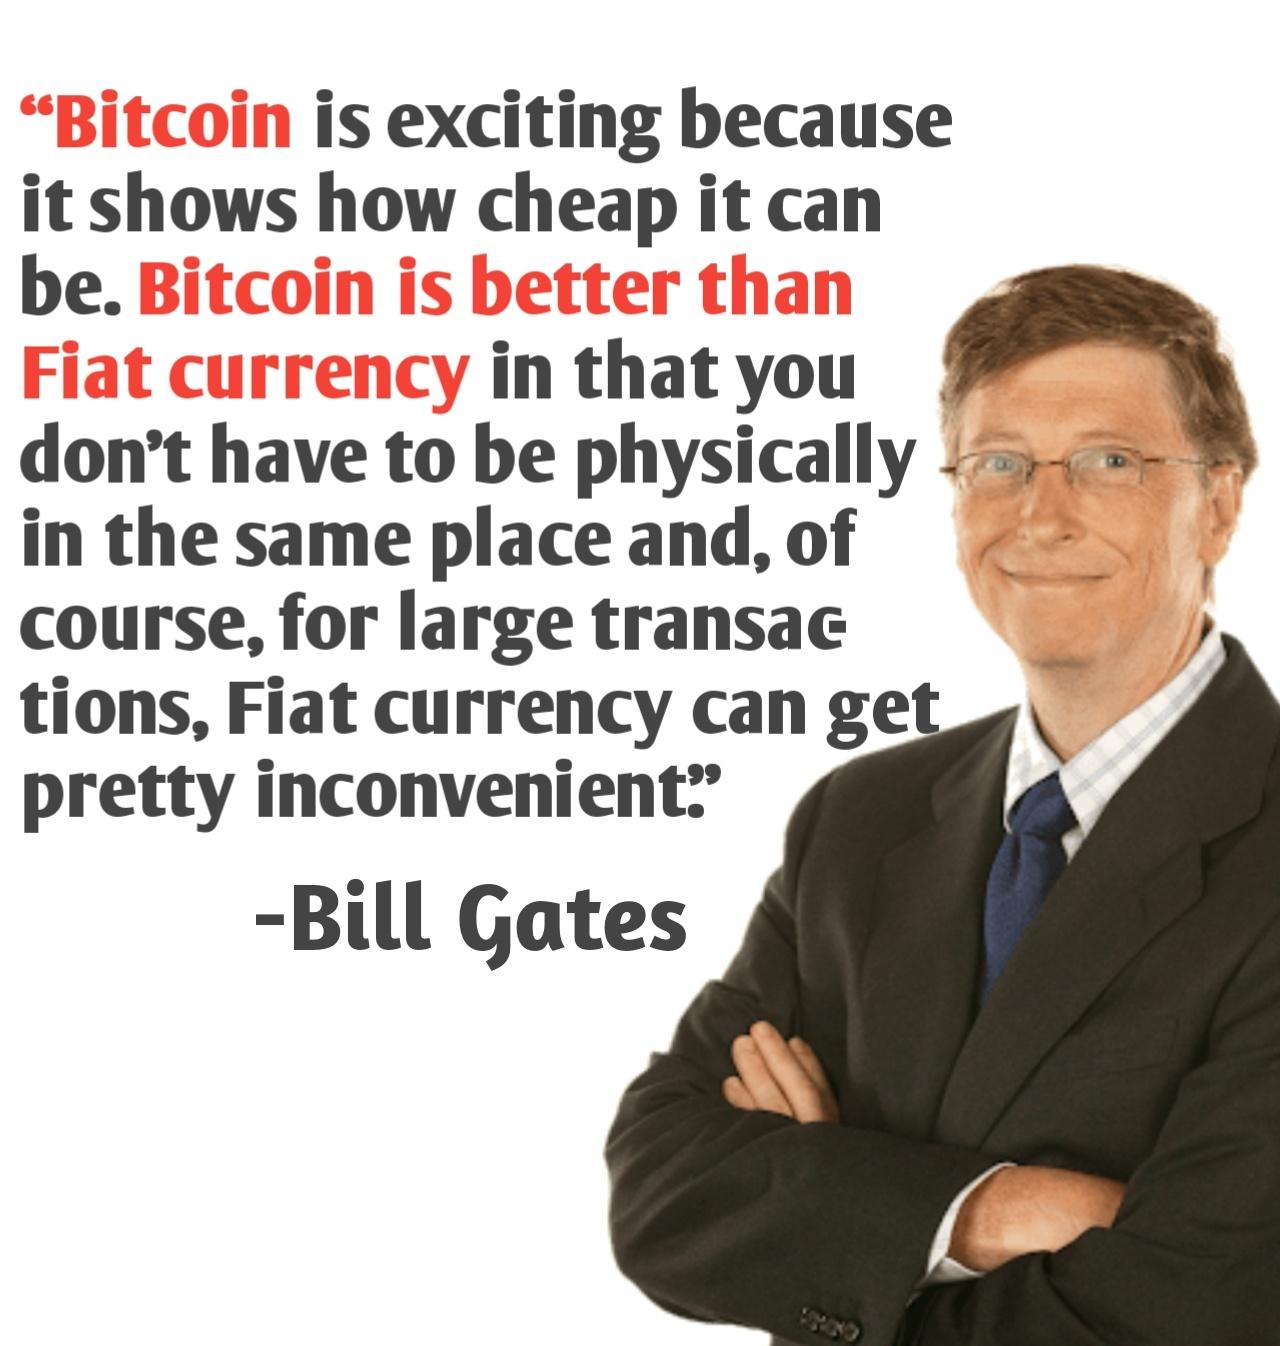 bill gates talking about cryptocurrency